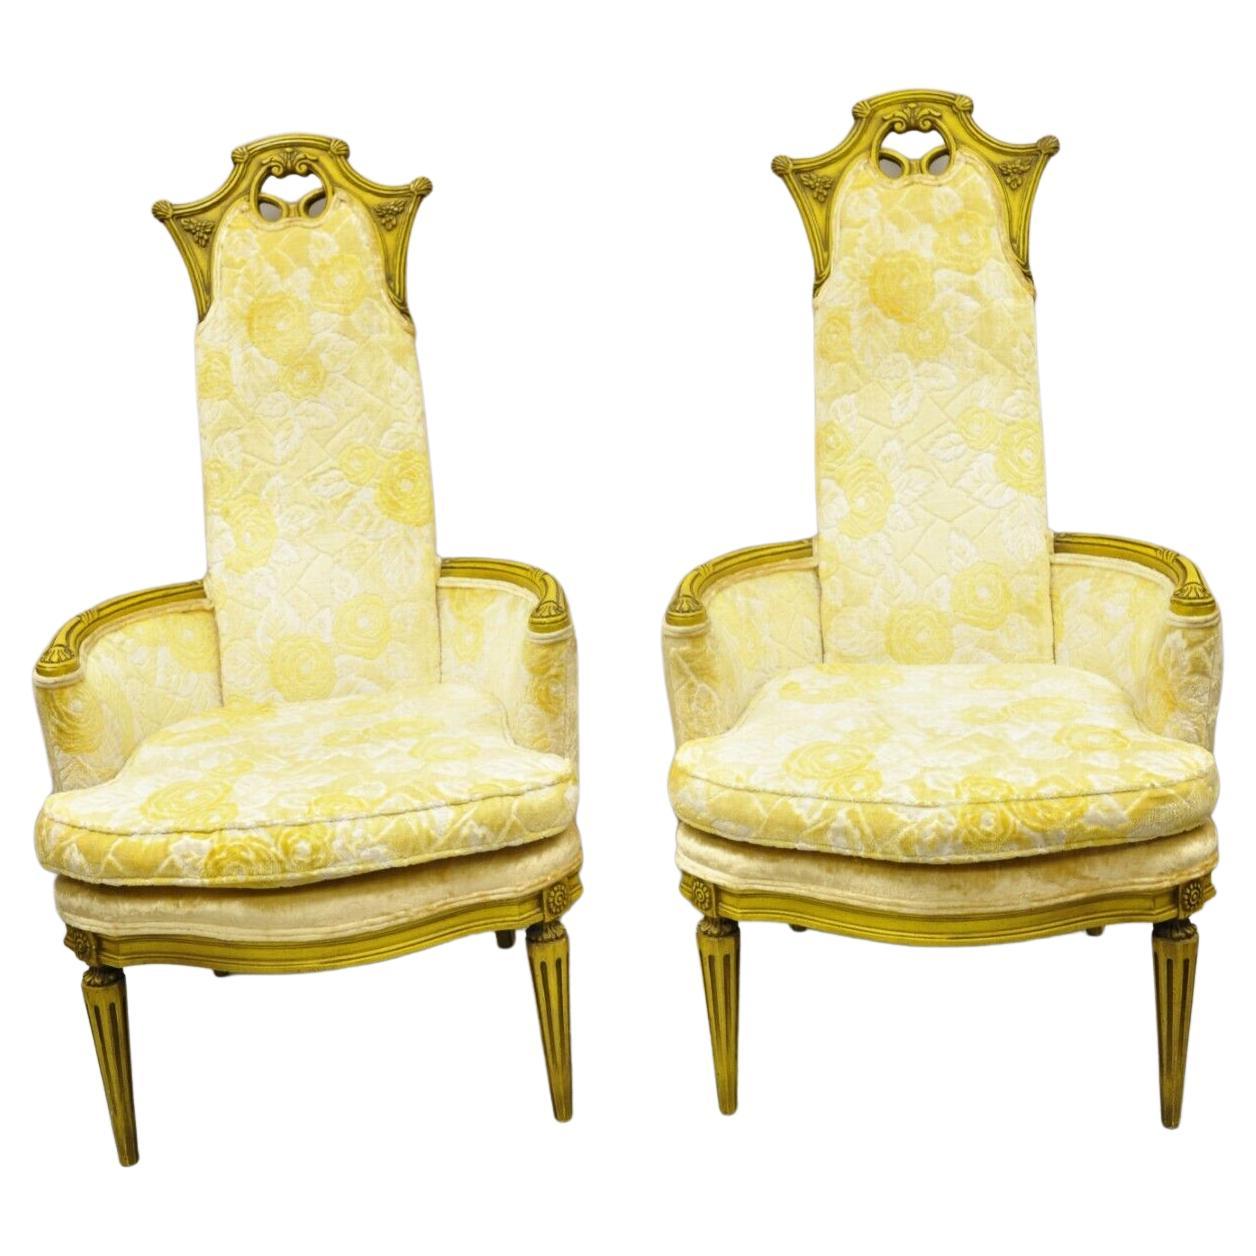 Vintage French Hollywood Regency Yellow Fireside Lounge Chairs - a Pair For Sale